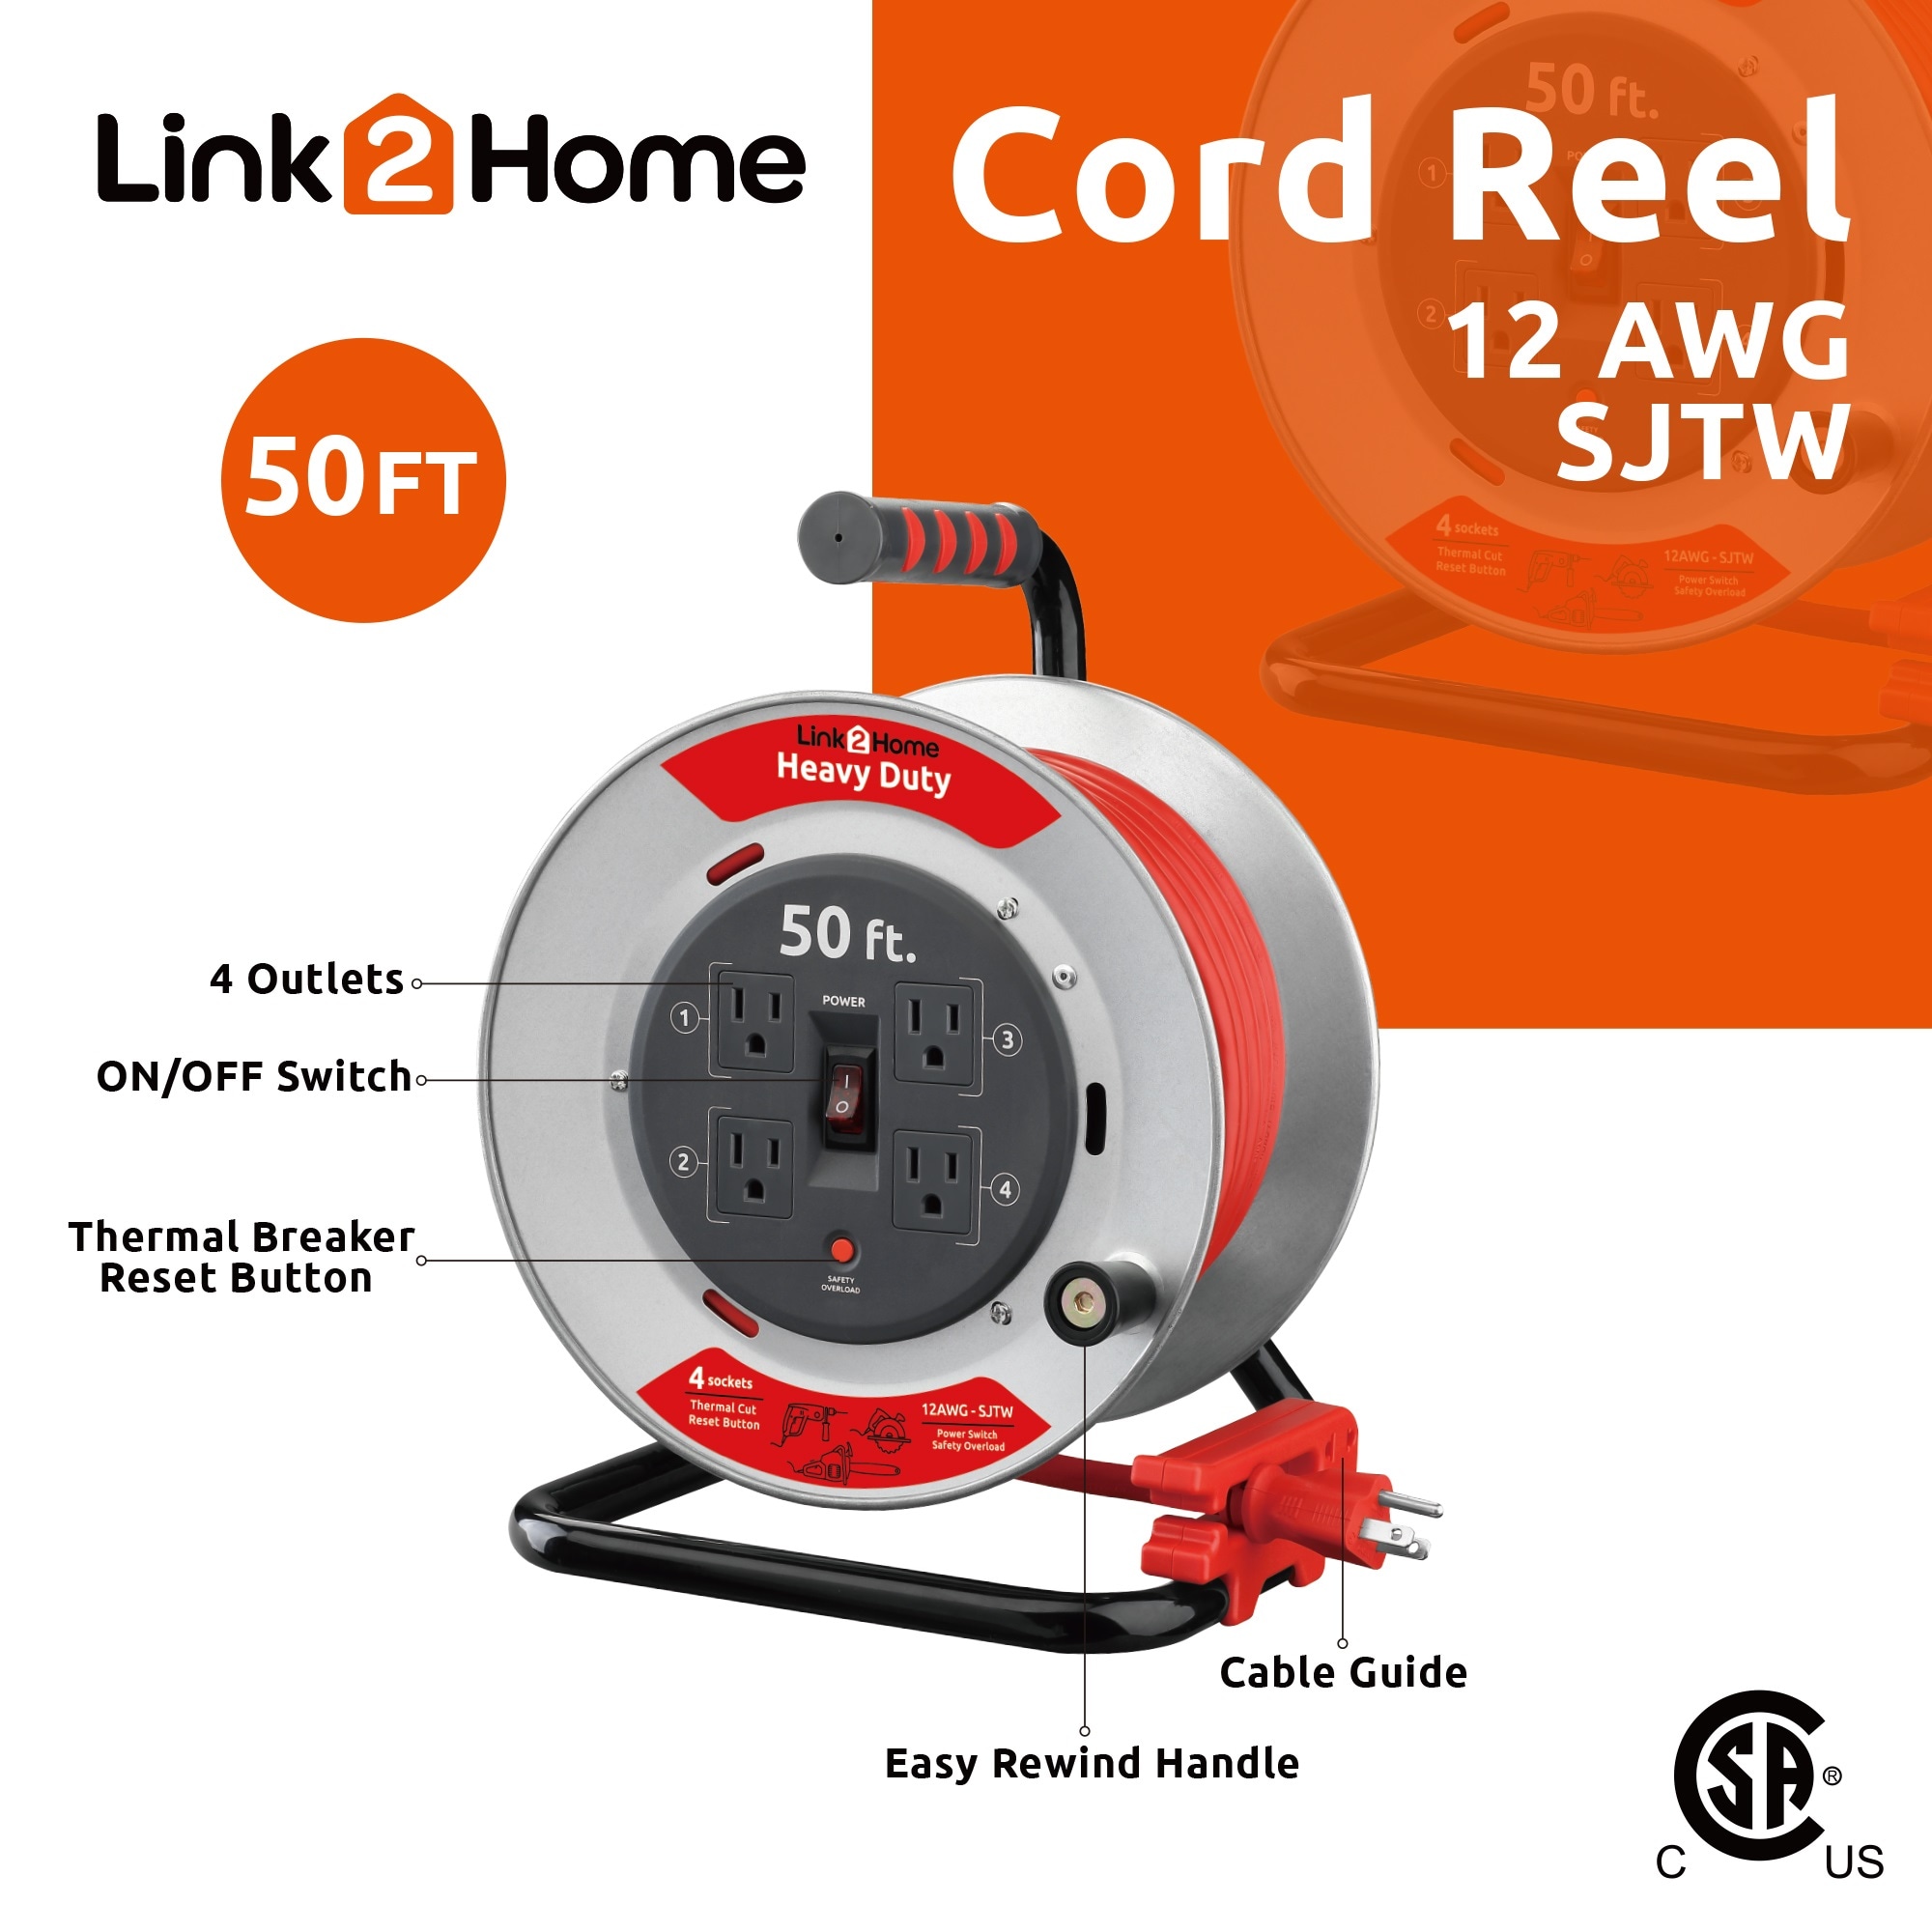 Link2Home Cord Reel 35 ft. Extension Cord 4 Power Outlets – 14 AWG SJTW  Cable. 